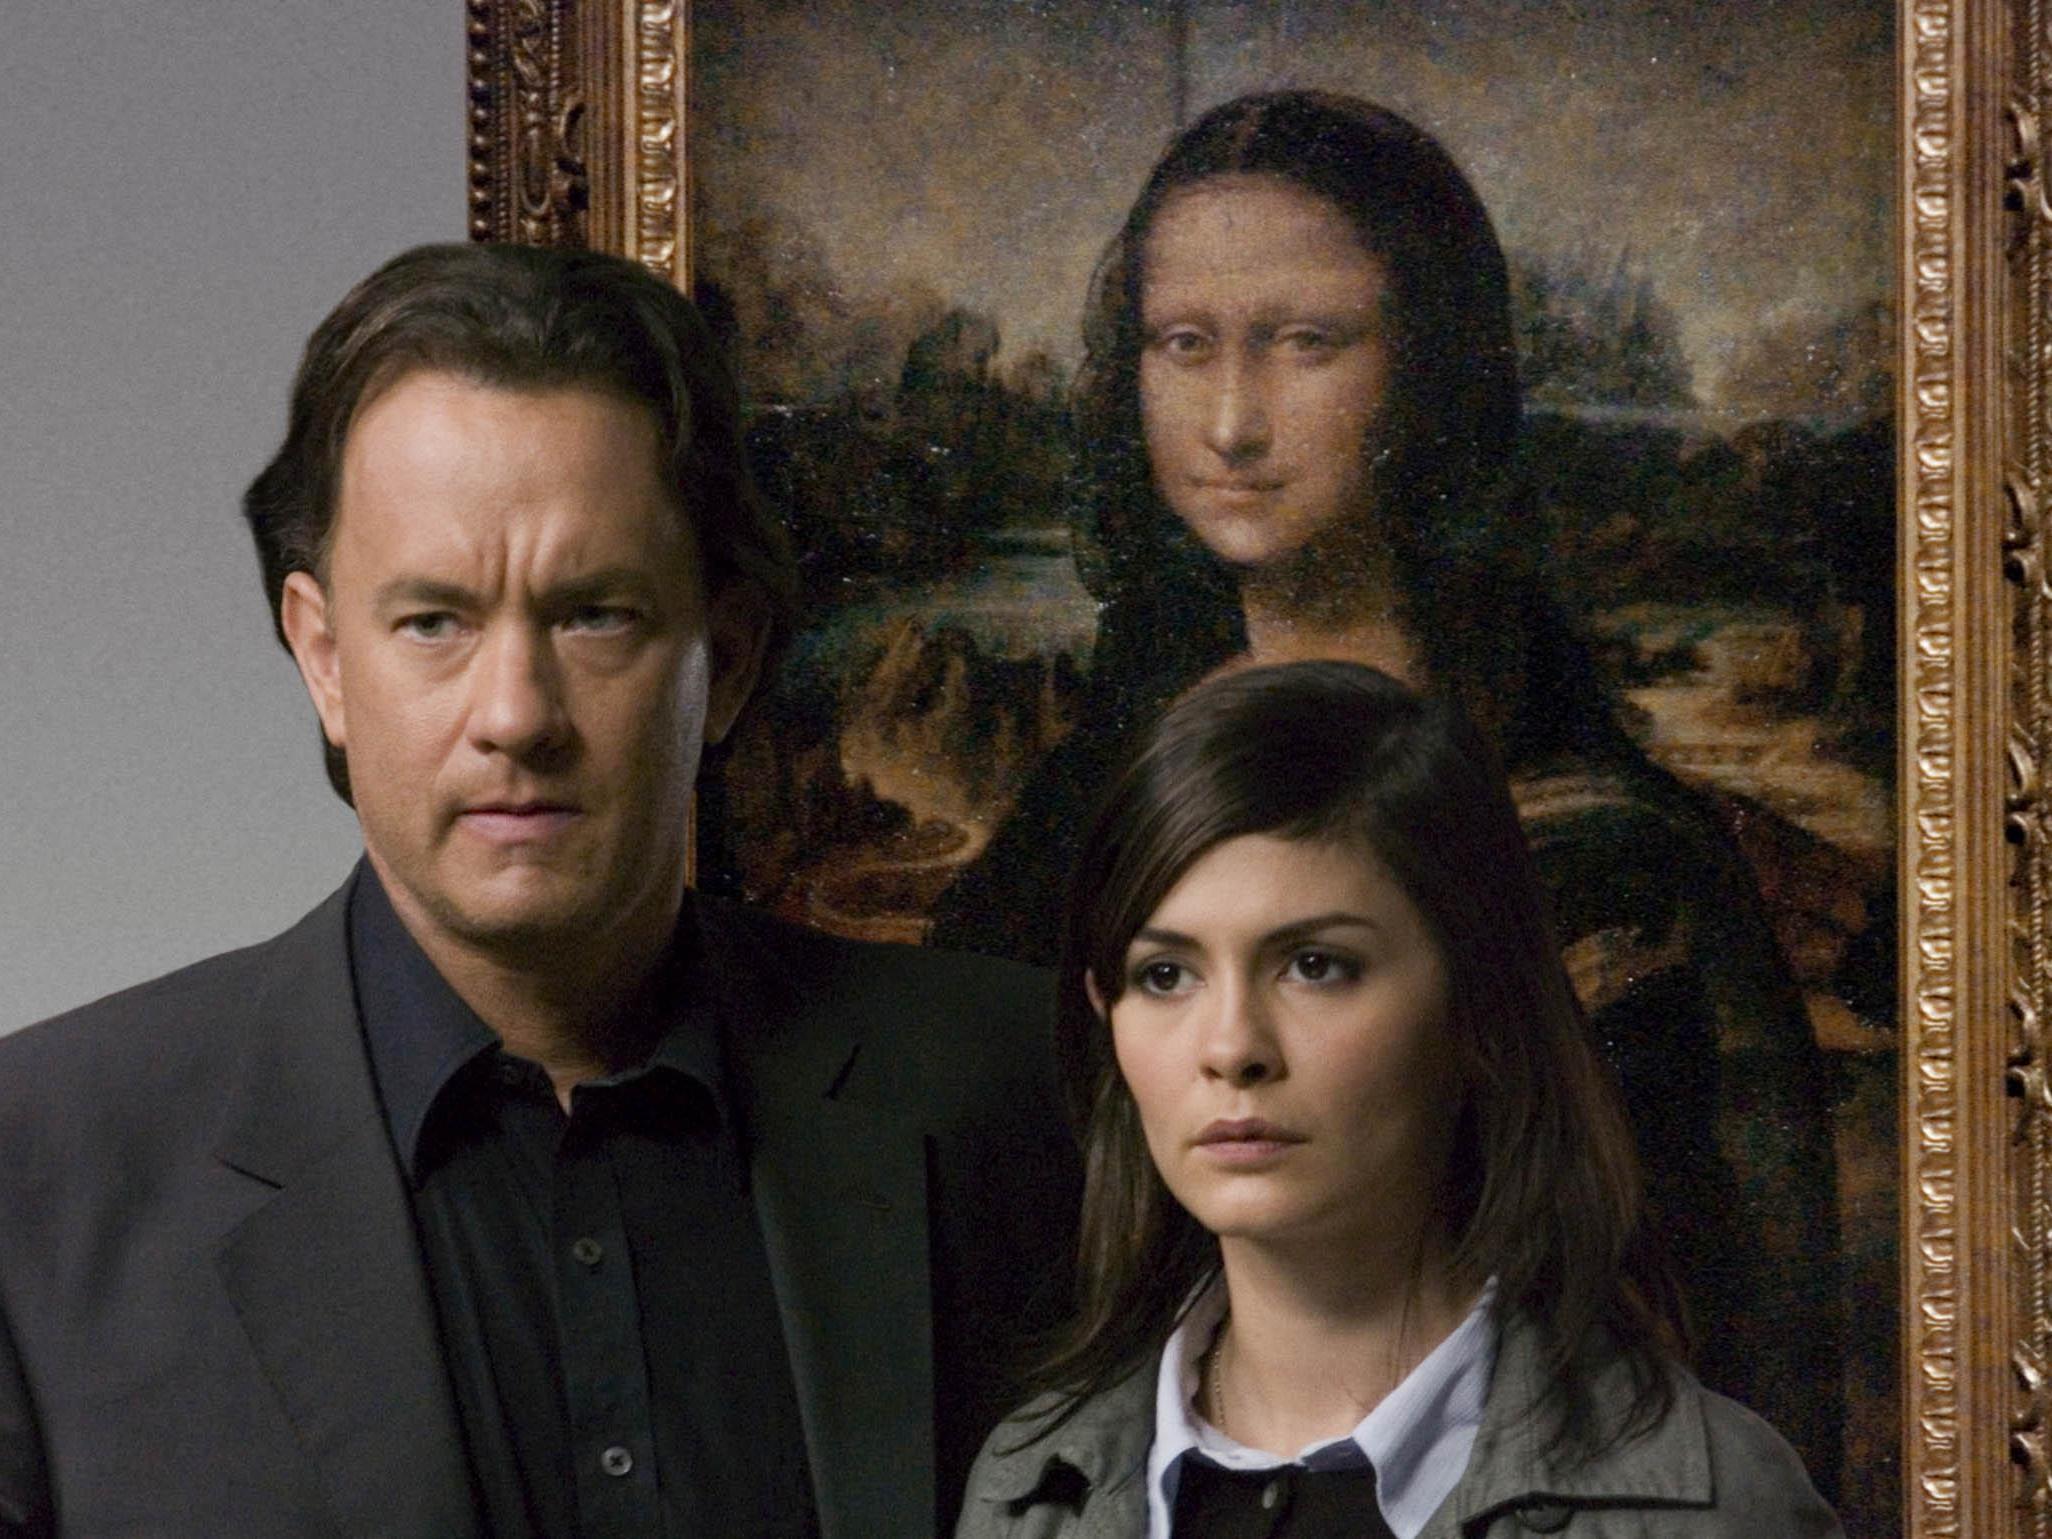 The 2006 film version of 'The Da Vinci Code' starring Tom Hanks and Audrey Tautou